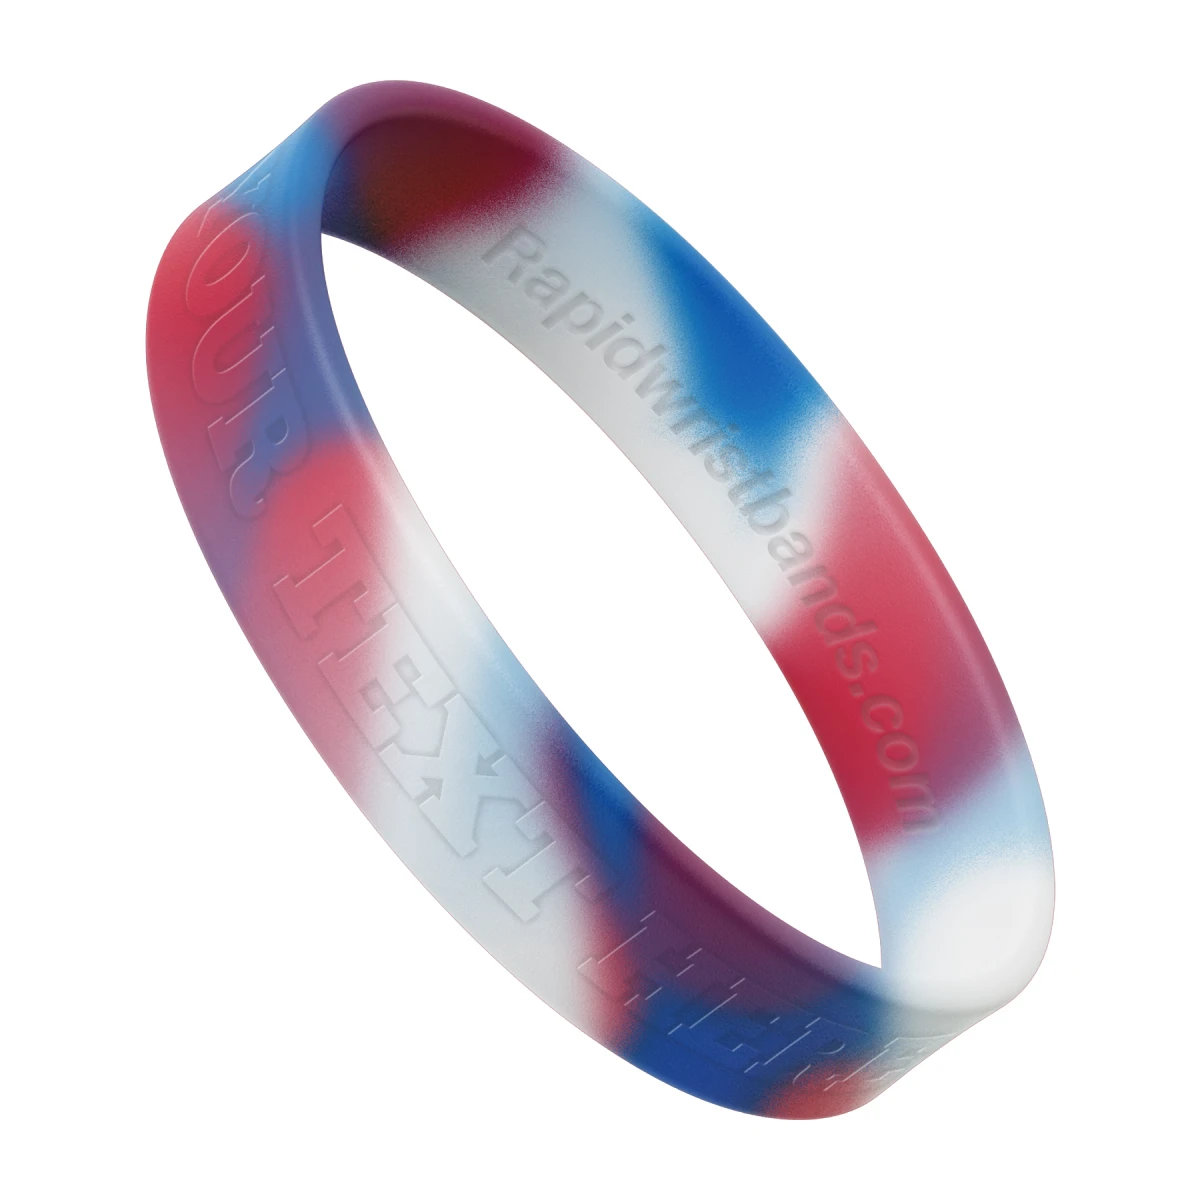 Swirl Red/White/Blue Wristband With Your Text Here Embossed